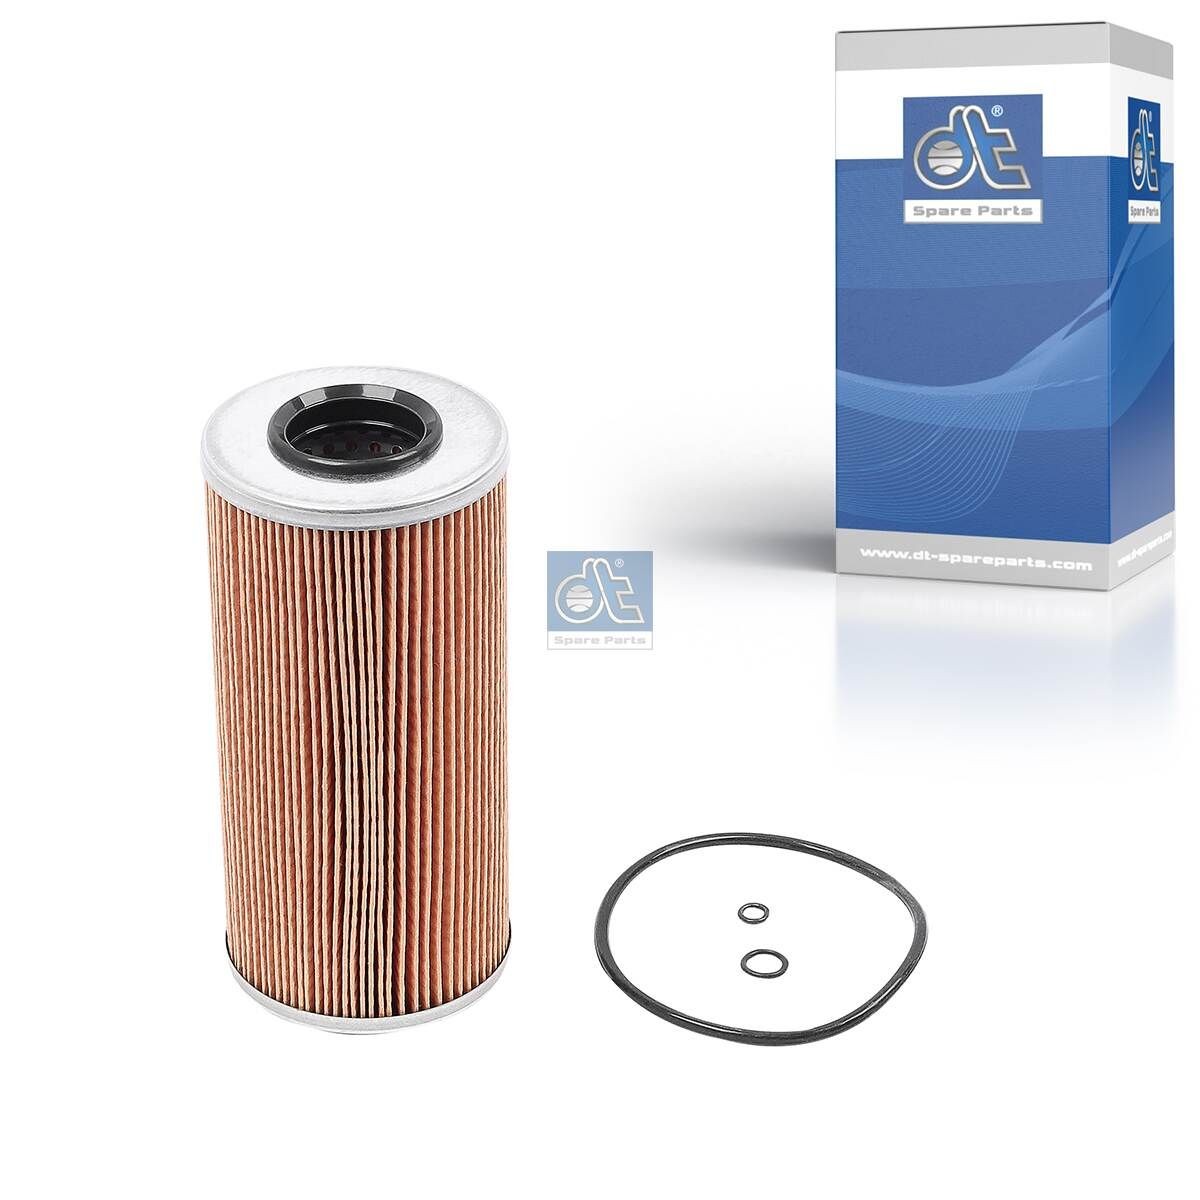 HU 951 x DT Spare Parts 3.14108 Oil filter 606-184-02-25